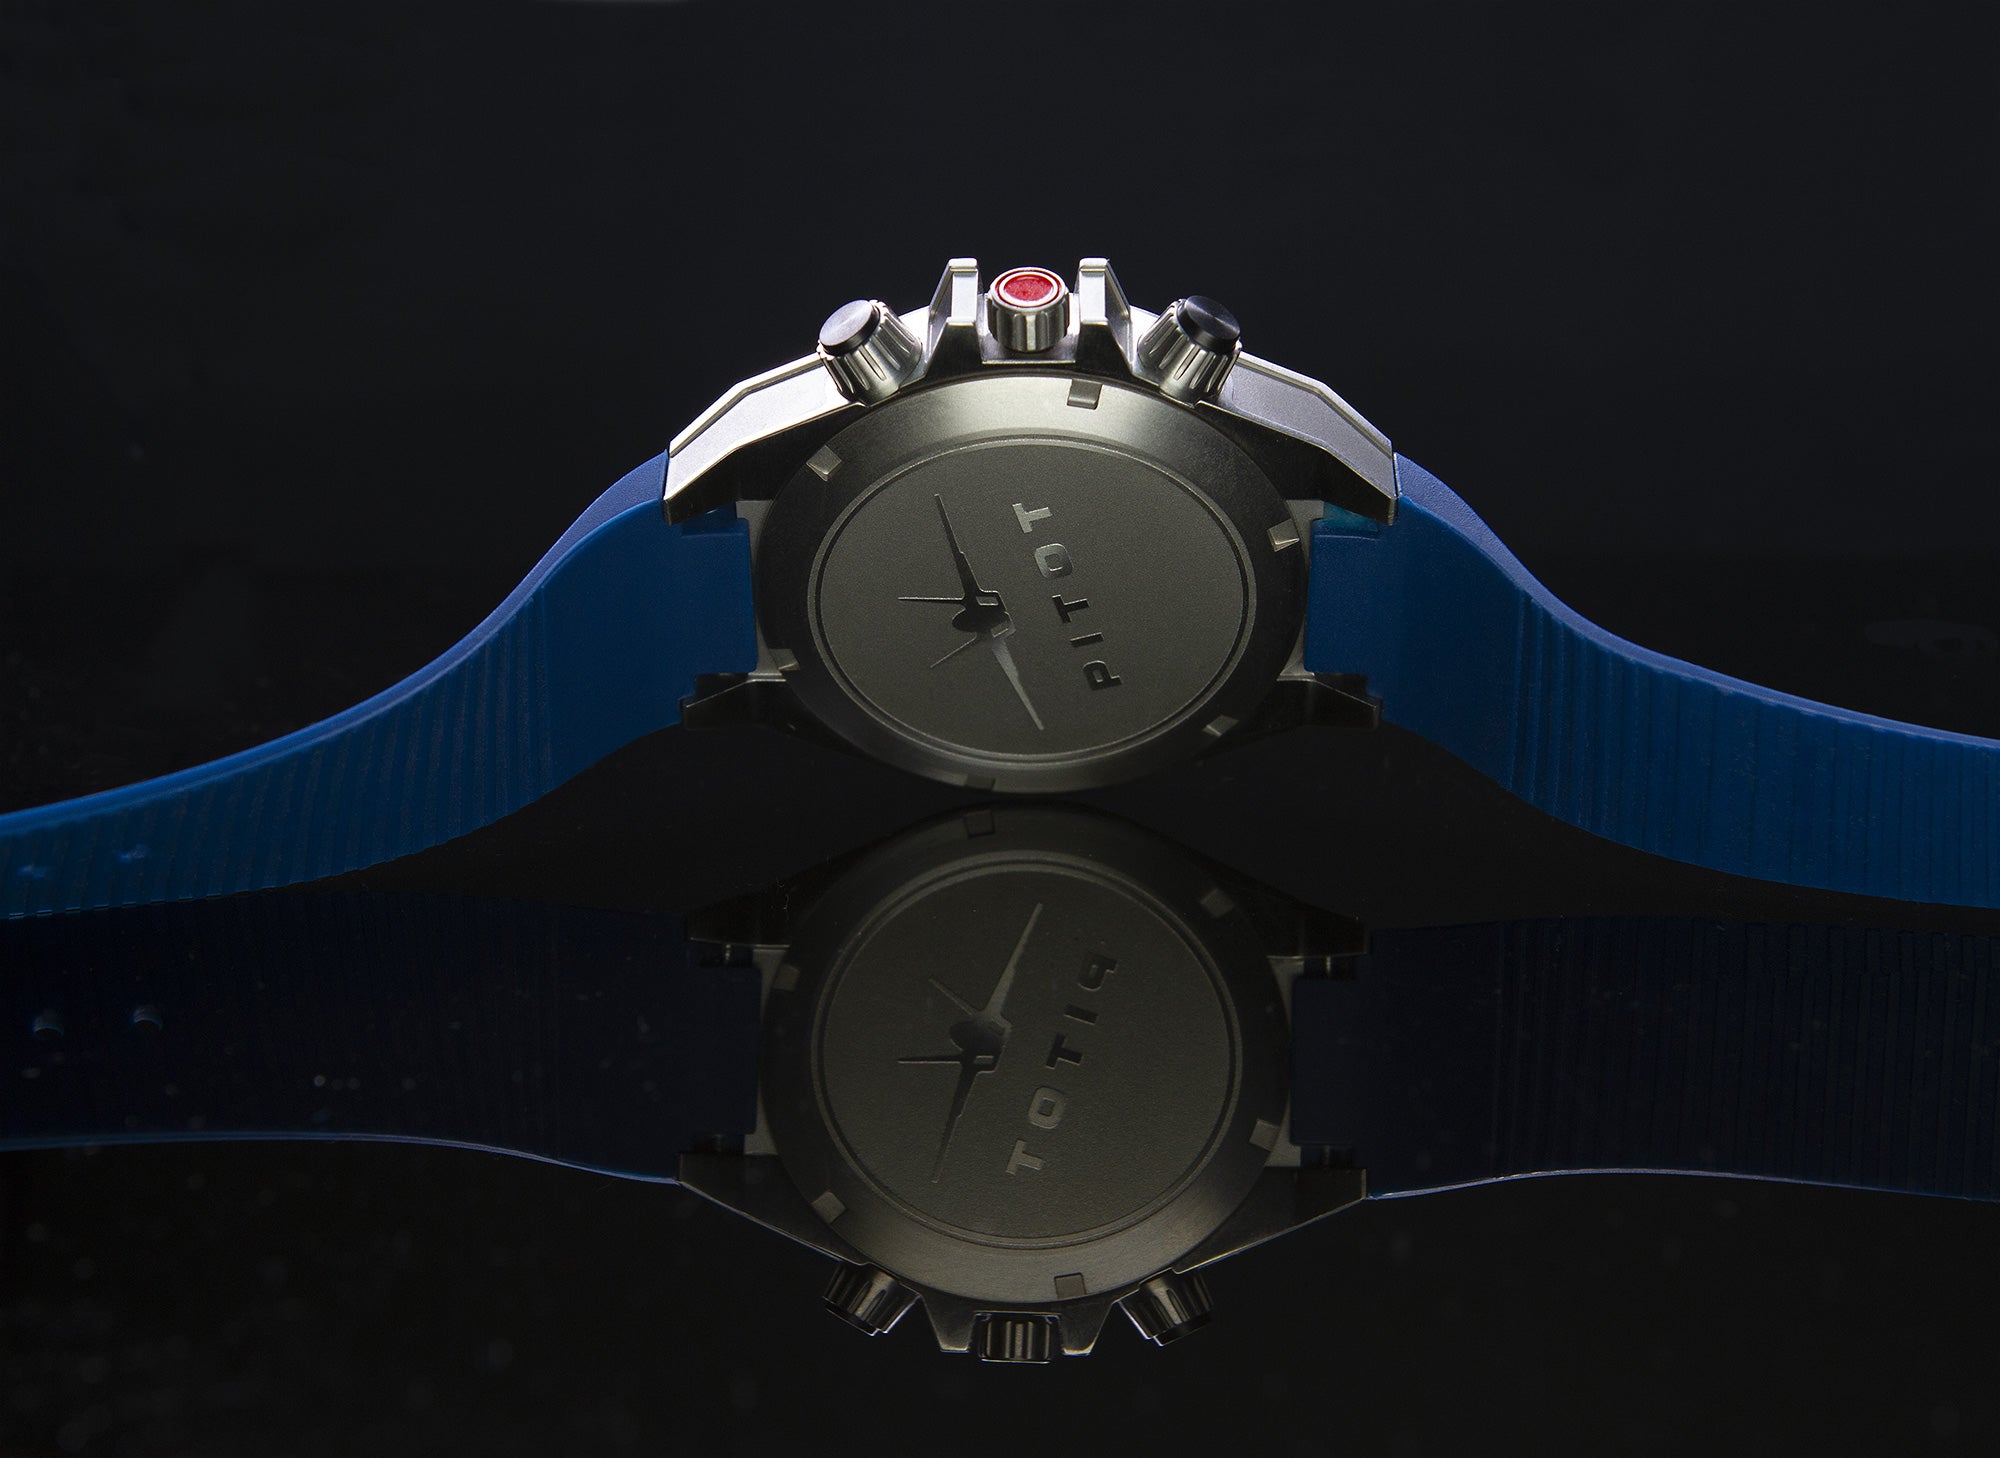 Interesting news from Pitot watches